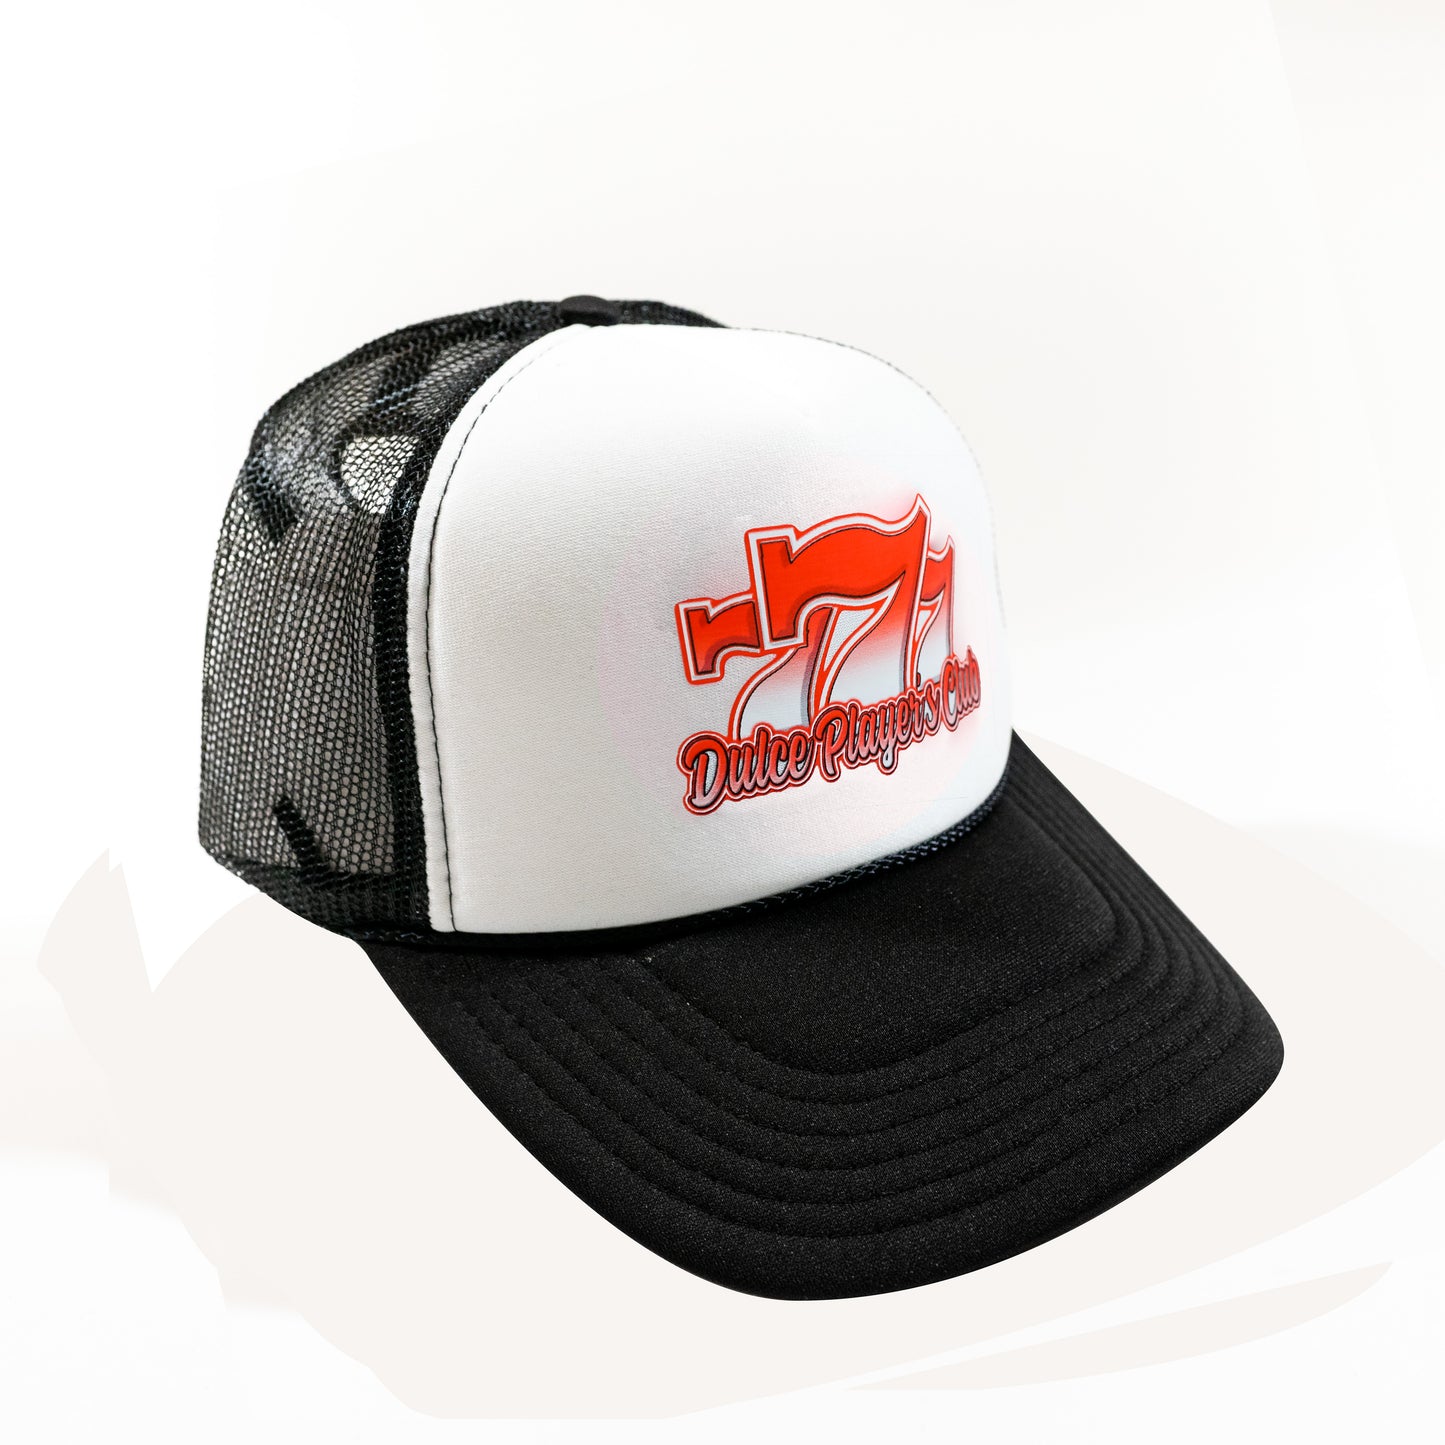 Red "777 Dulce Players Club" Trucker Hat